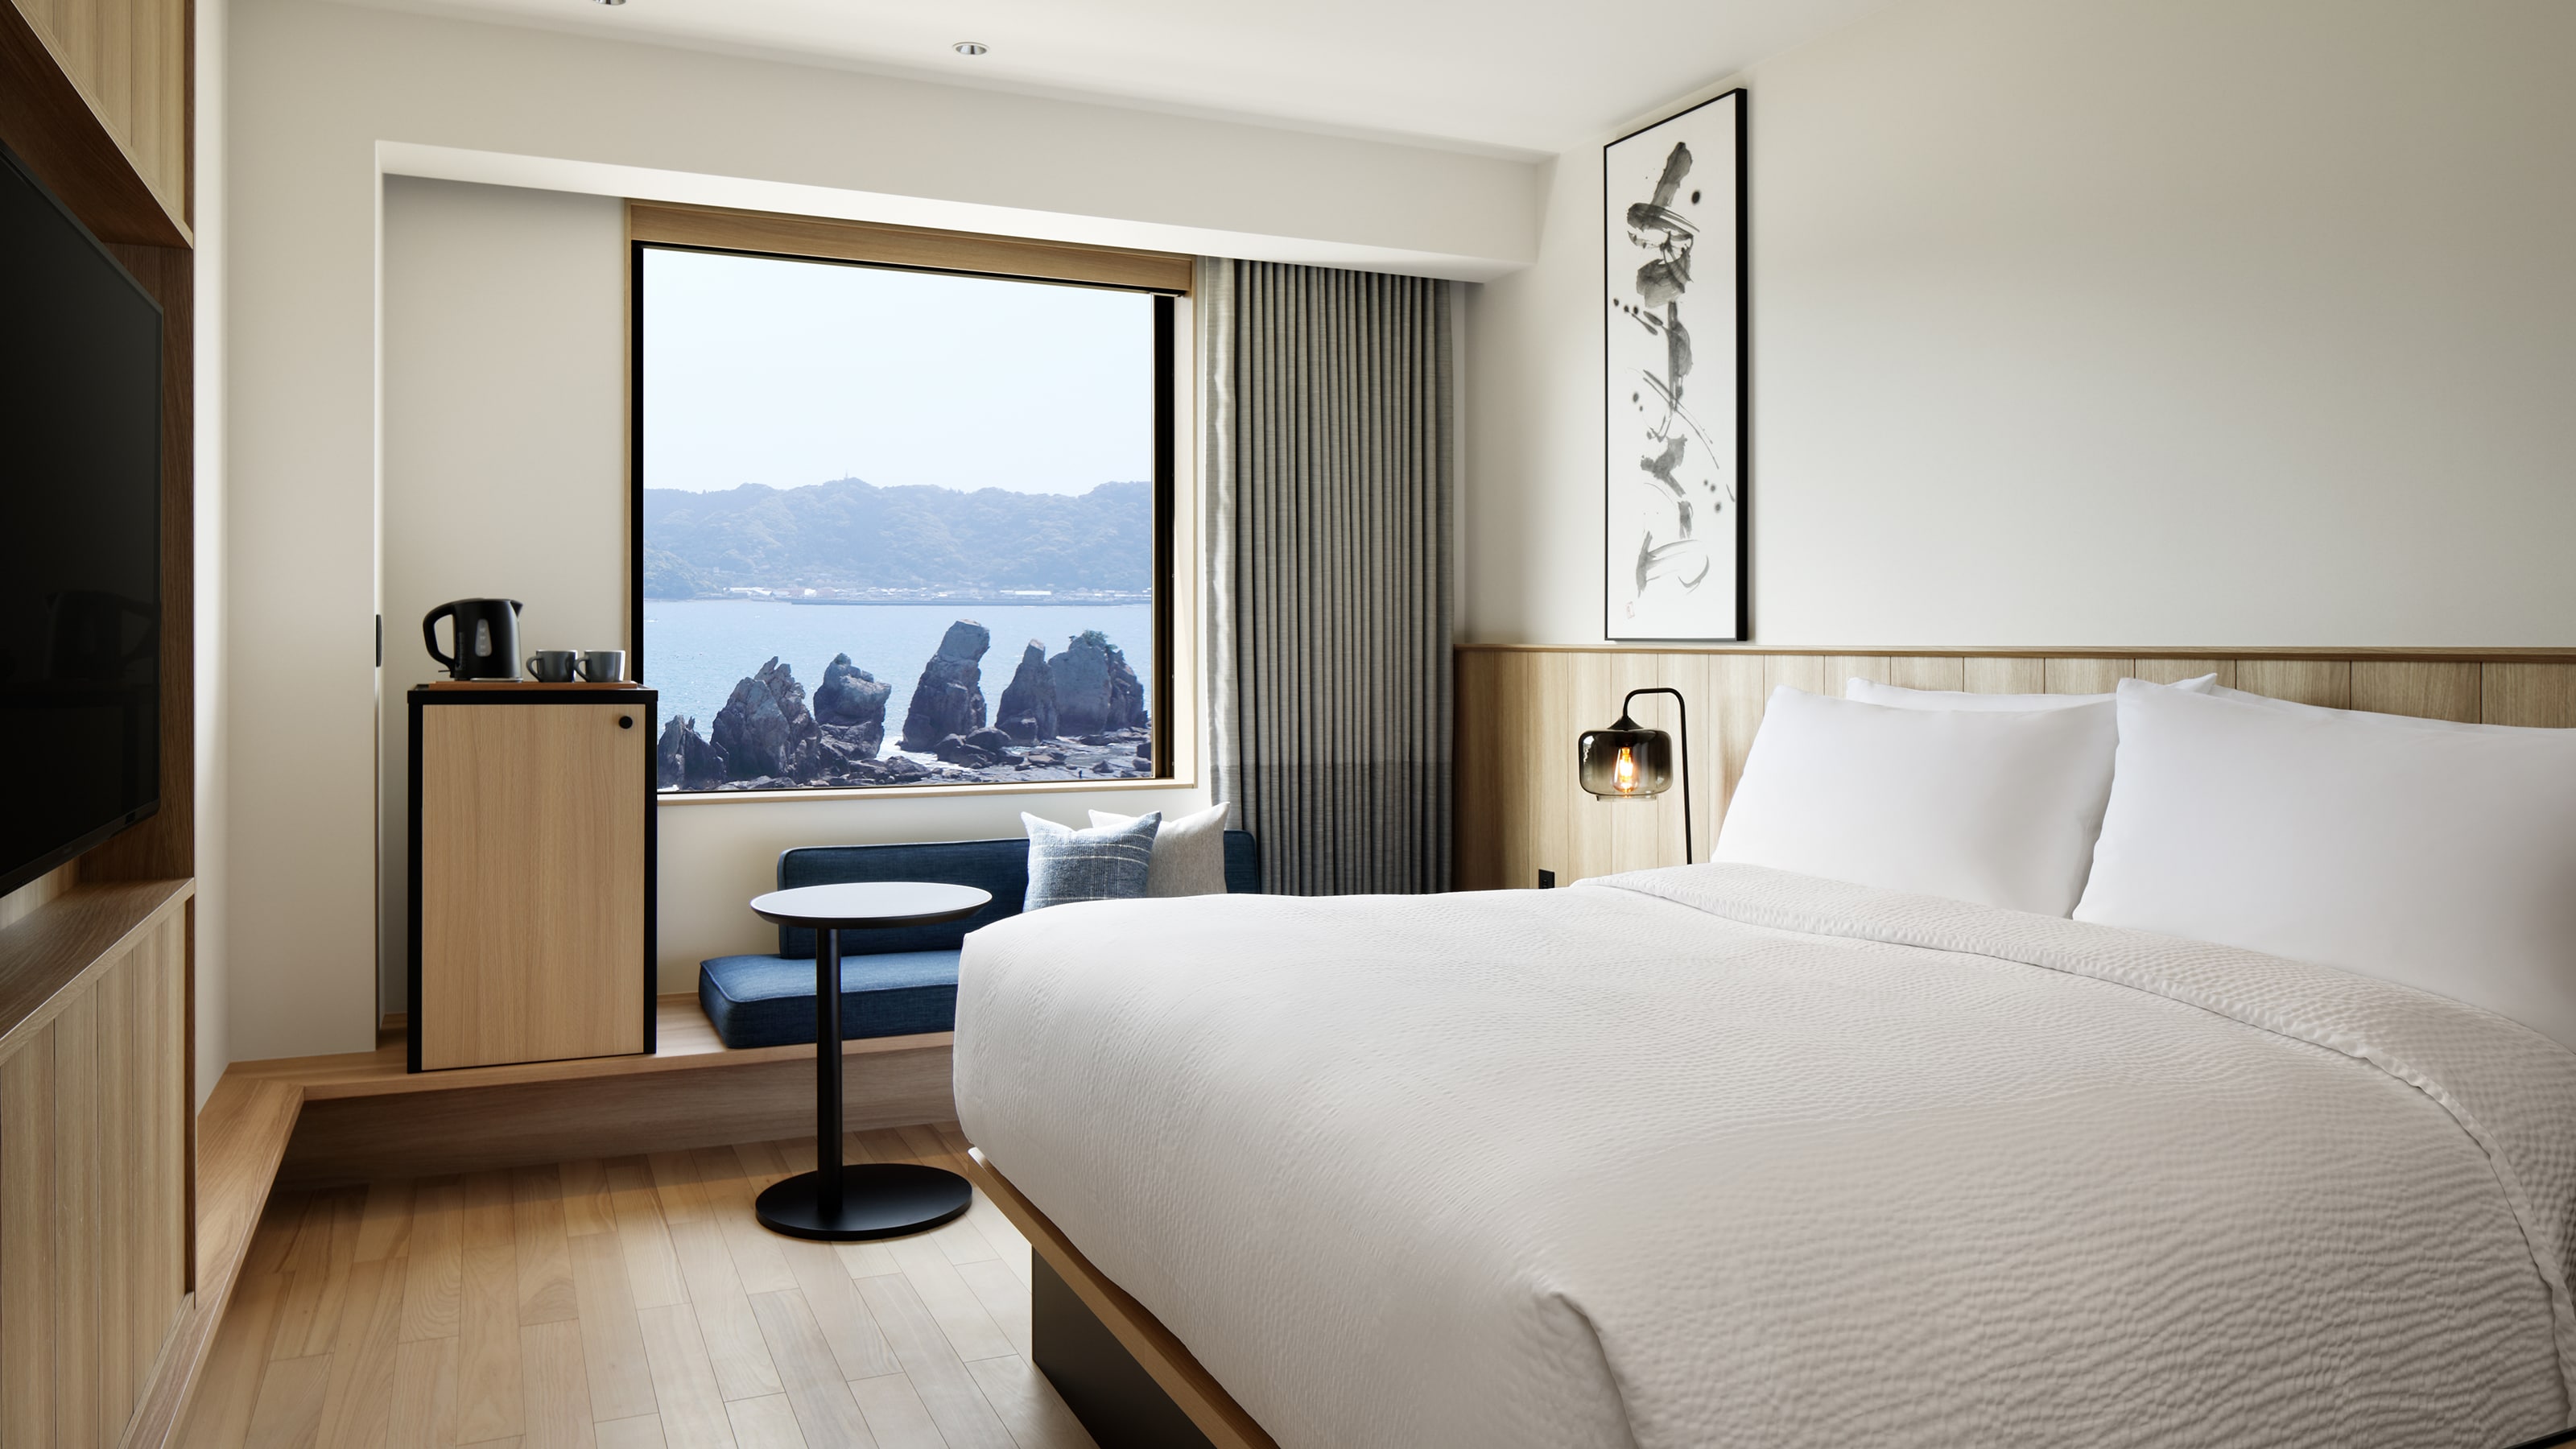 Ocean View King Room: 25 square meters, non-smoking, bed width 180 cm. Enjoy a relaxing moment in a room with a sea view.